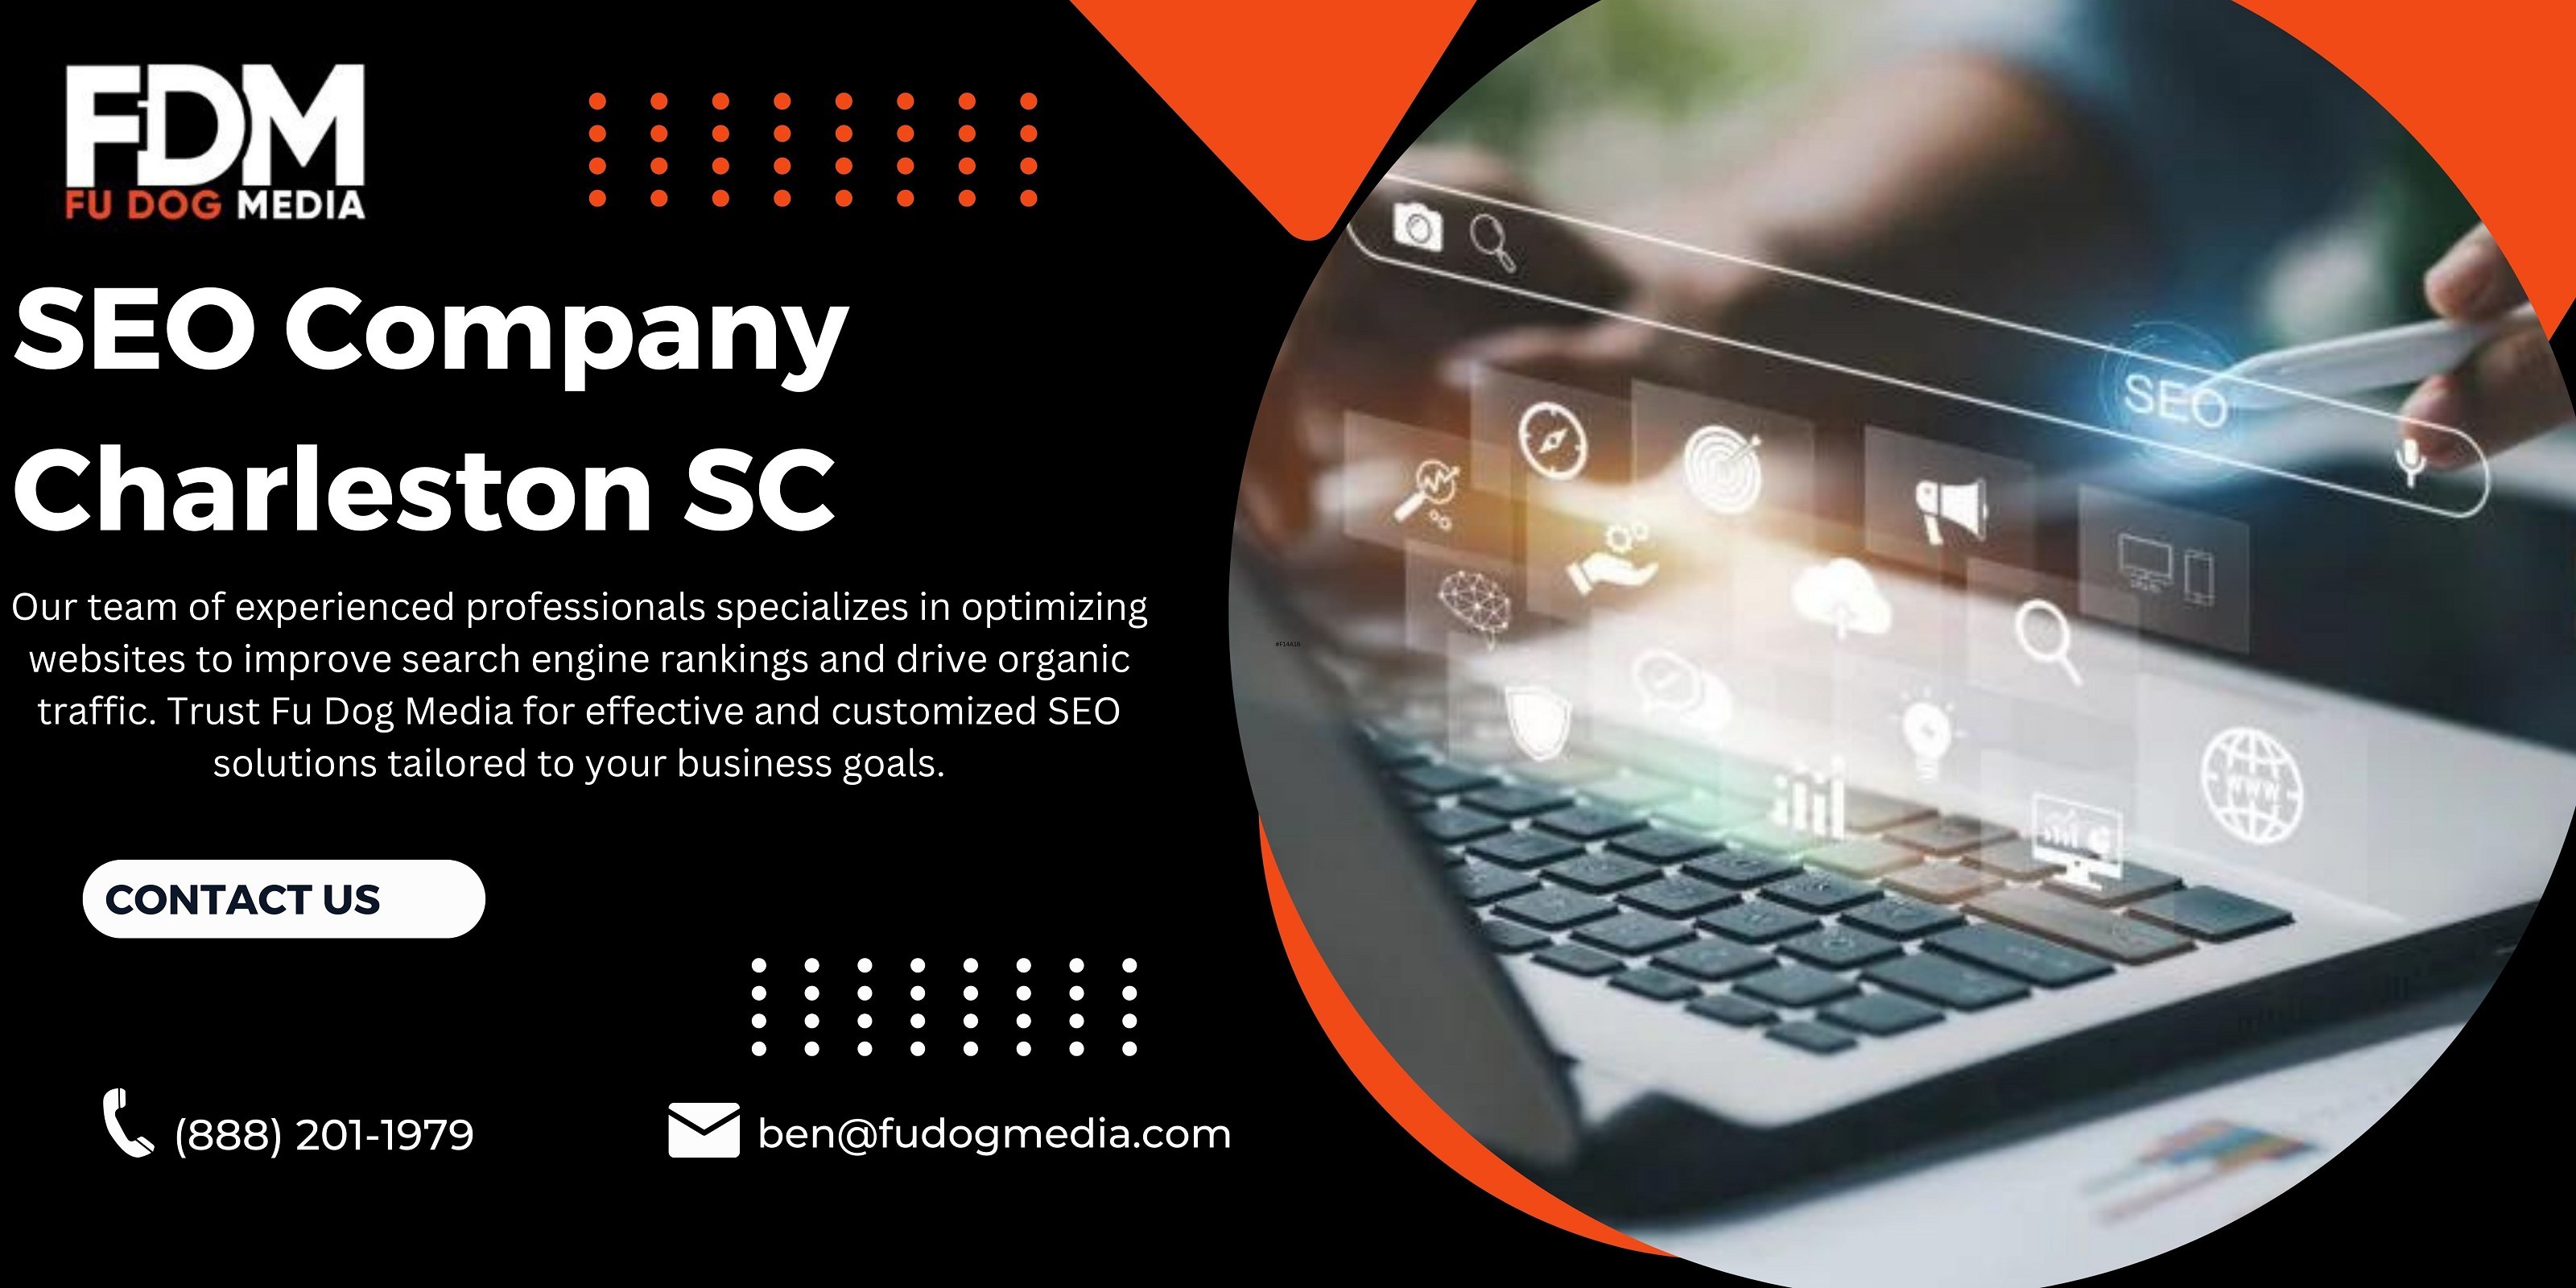 How to Find the Best SEO Company in Charleston, SC